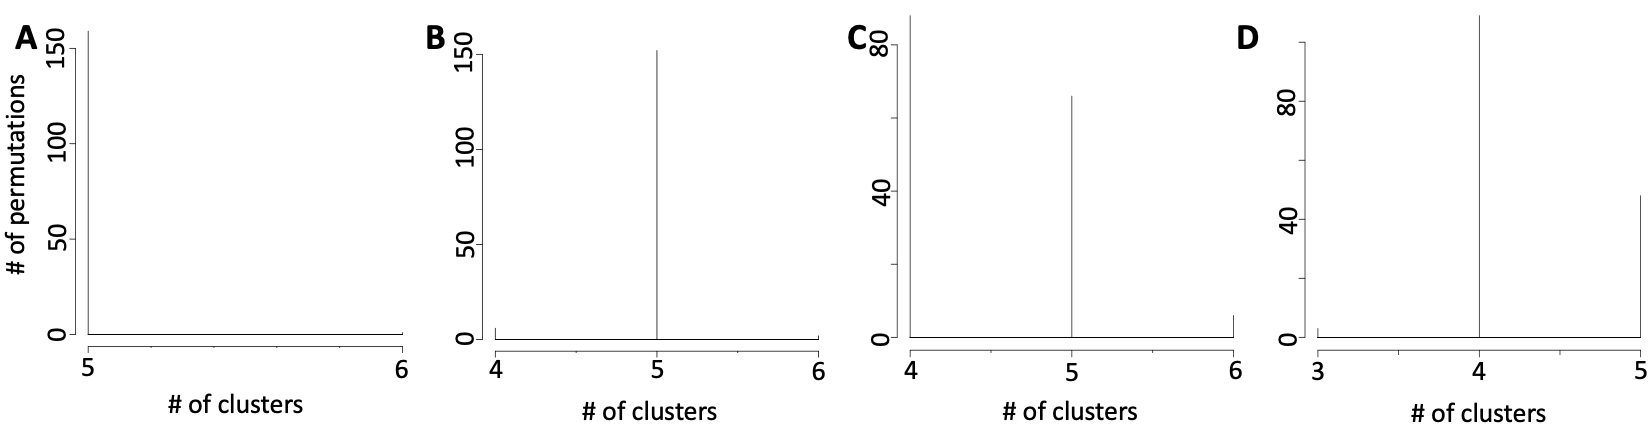 Clusters number is dependent by the cell type similarity: A) number of clusters detectable by griph in setA, B) number of clusters detectable by griph in setB, C) number of clusters detectable by griph in setC, D) number of clusters detectable by griph in setD